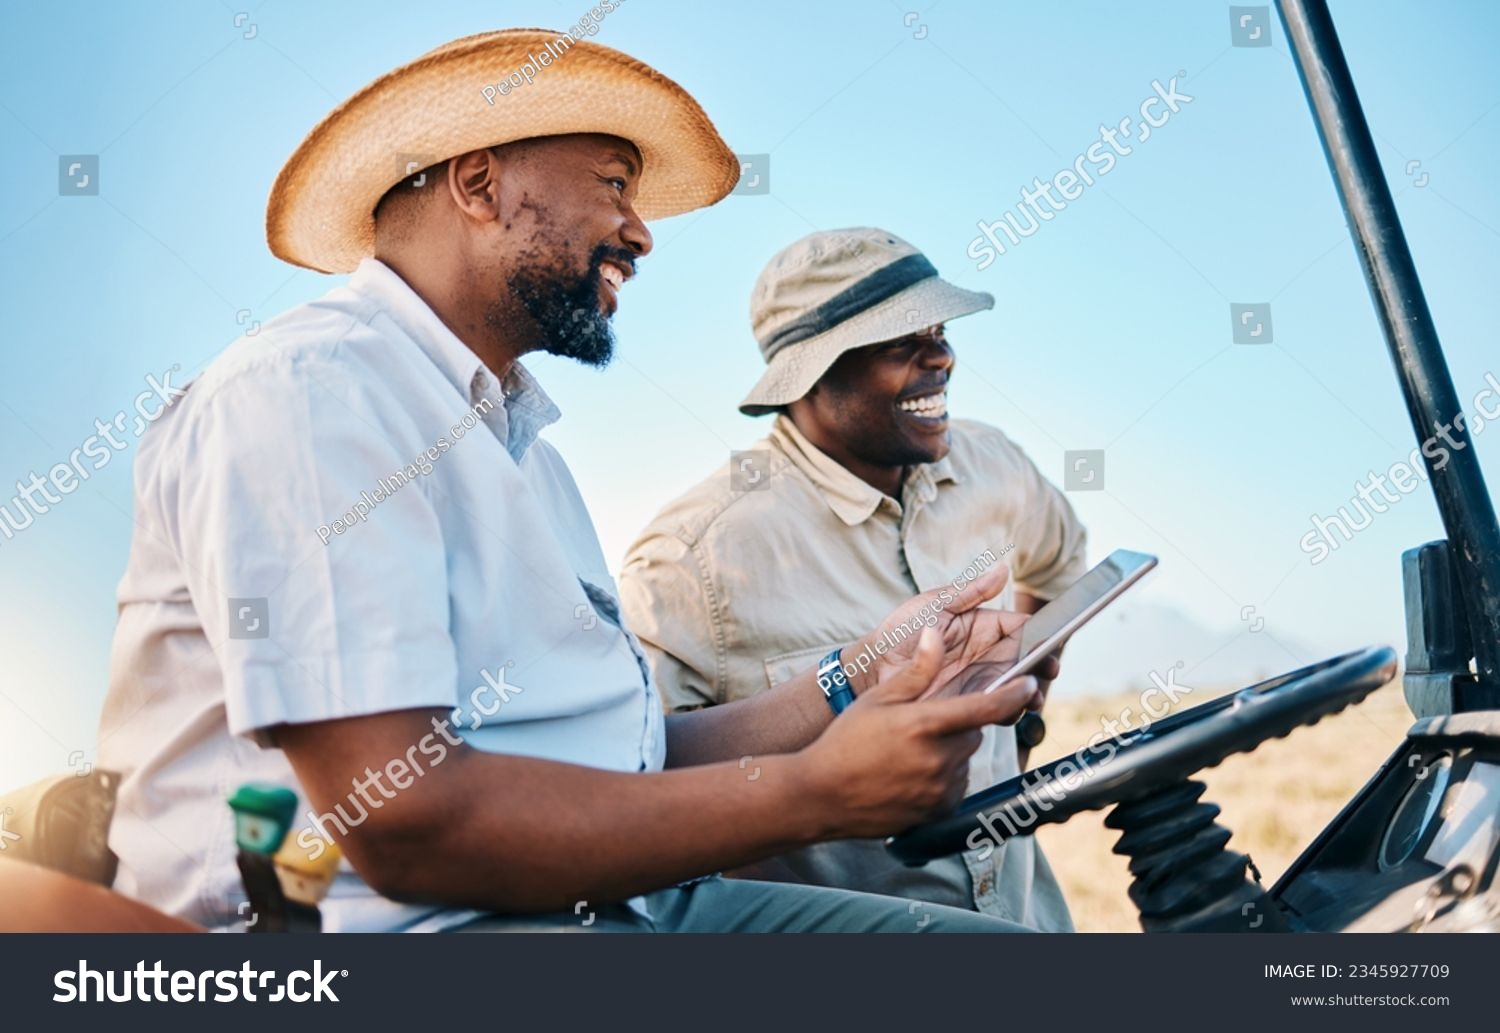 Game drive, safari and men laugh with tablet for direction in Kenya desert with car for travel transport. Holiday, tour guide and driving with tech for adventure, holiday and journey with employees #2345927709